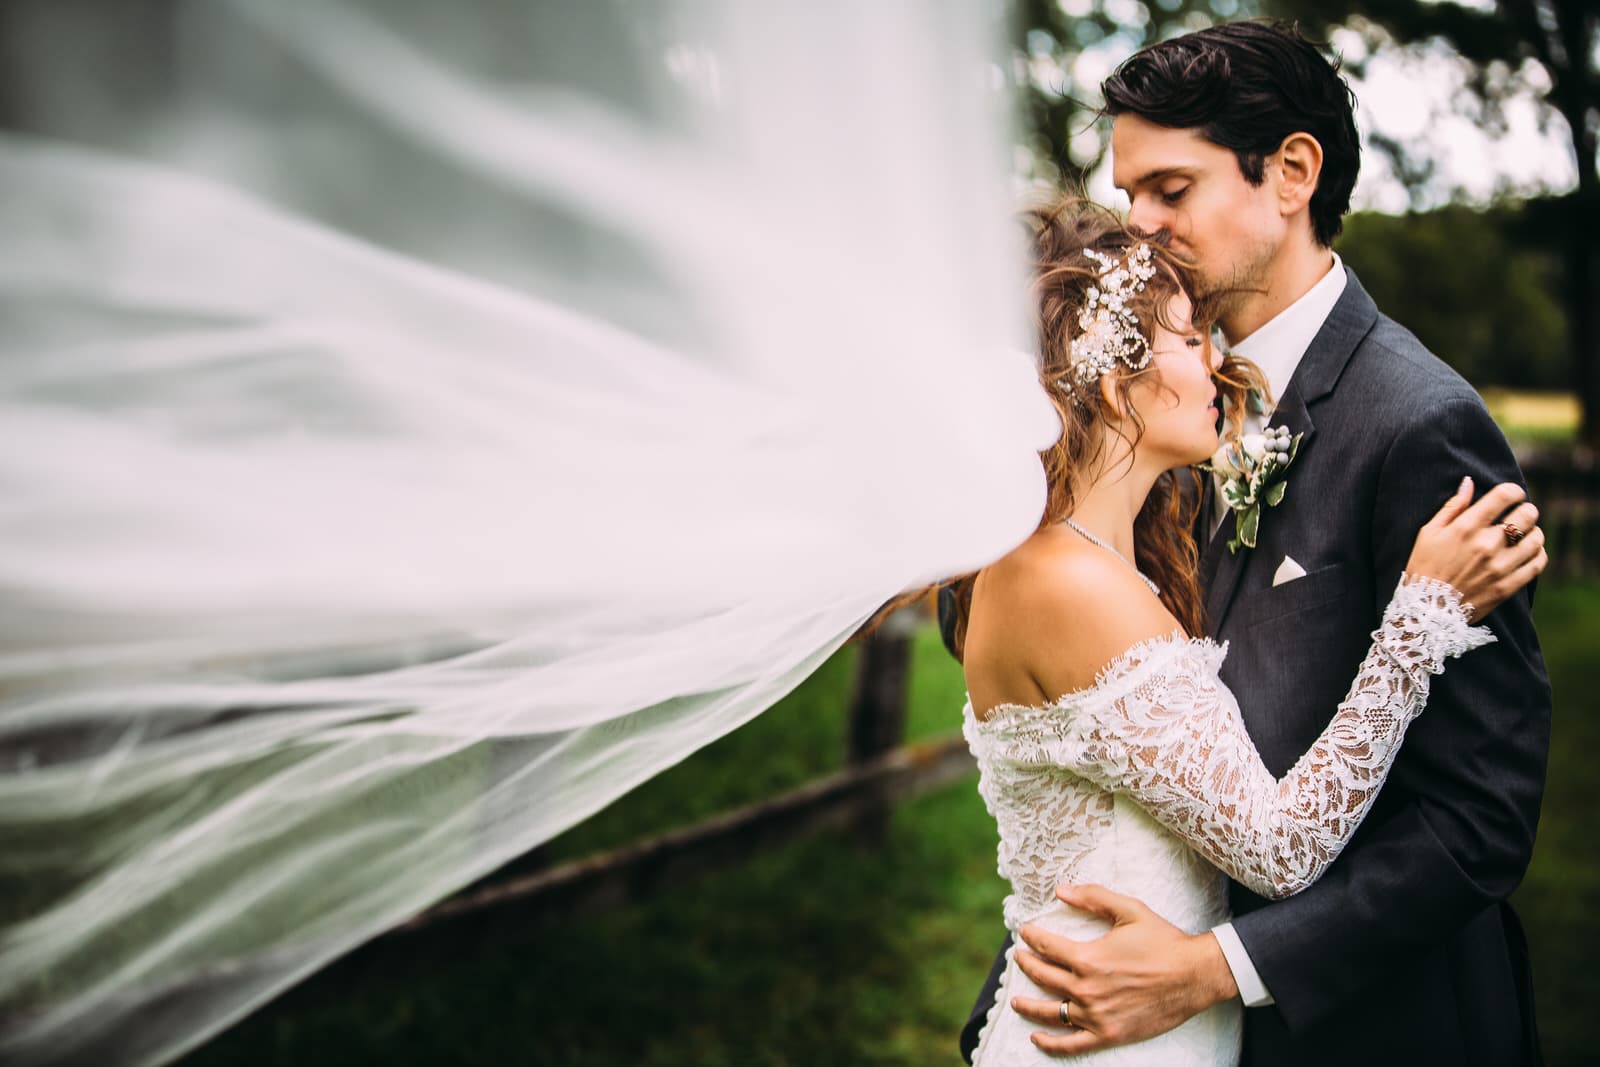 A bride and groom embrace under a veil in a field.